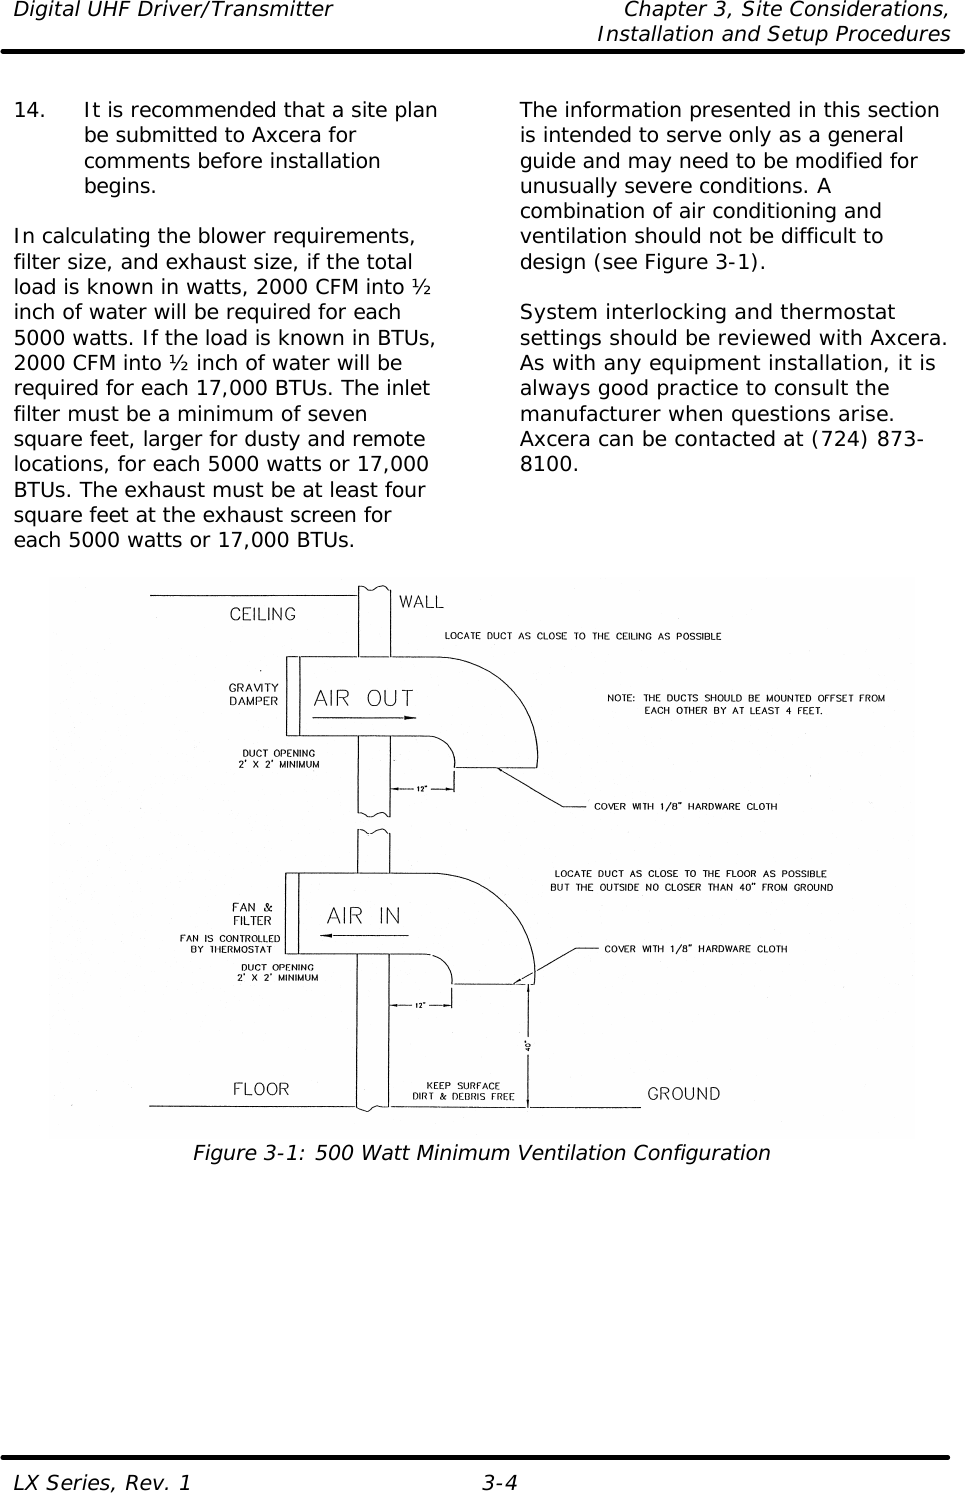 Digital UHF Driver/Transmitter Chapter 3, Site Considerations,   Installation and Setup Procedures  LX Series, Rev. 1 3-4  14. It is recommended that a site plan be submitted to Axcera for comments before installation begins.  In calculating the blower requirements, filter size, and exhaust size, if the total load is known in watts, 2000 CFM into ½ inch of water will be required for each 5000 watts. If the load is known in BTUs, 2000 CFM into ½ inch of water will be required for each 17,000 BTUs. The inlet filter must be a minimum of seven square feet, larger for dusty and remote locations, for each 5000 watts or 17,000 BTUs. The exhaust must be at least four square feet at the exhaust screen for each 5000 watts or 17,000 BTUs.  The information presented in this section is intended to serve only as a general guide and may need to be modified for unusually severe conditions. A combination of air conditioning and ventilation should not be difficult to design (see Figure 3-1).  System interlocking and thermostat settings should be reviewed with Axcera. As with any equipment installation, it is always good practice to consult the manufacturer when questions arise. Axcera can be contacted at (724) 873-8100.    Figure 3-1: 500 Watt Minimum Ventilation Configuration   